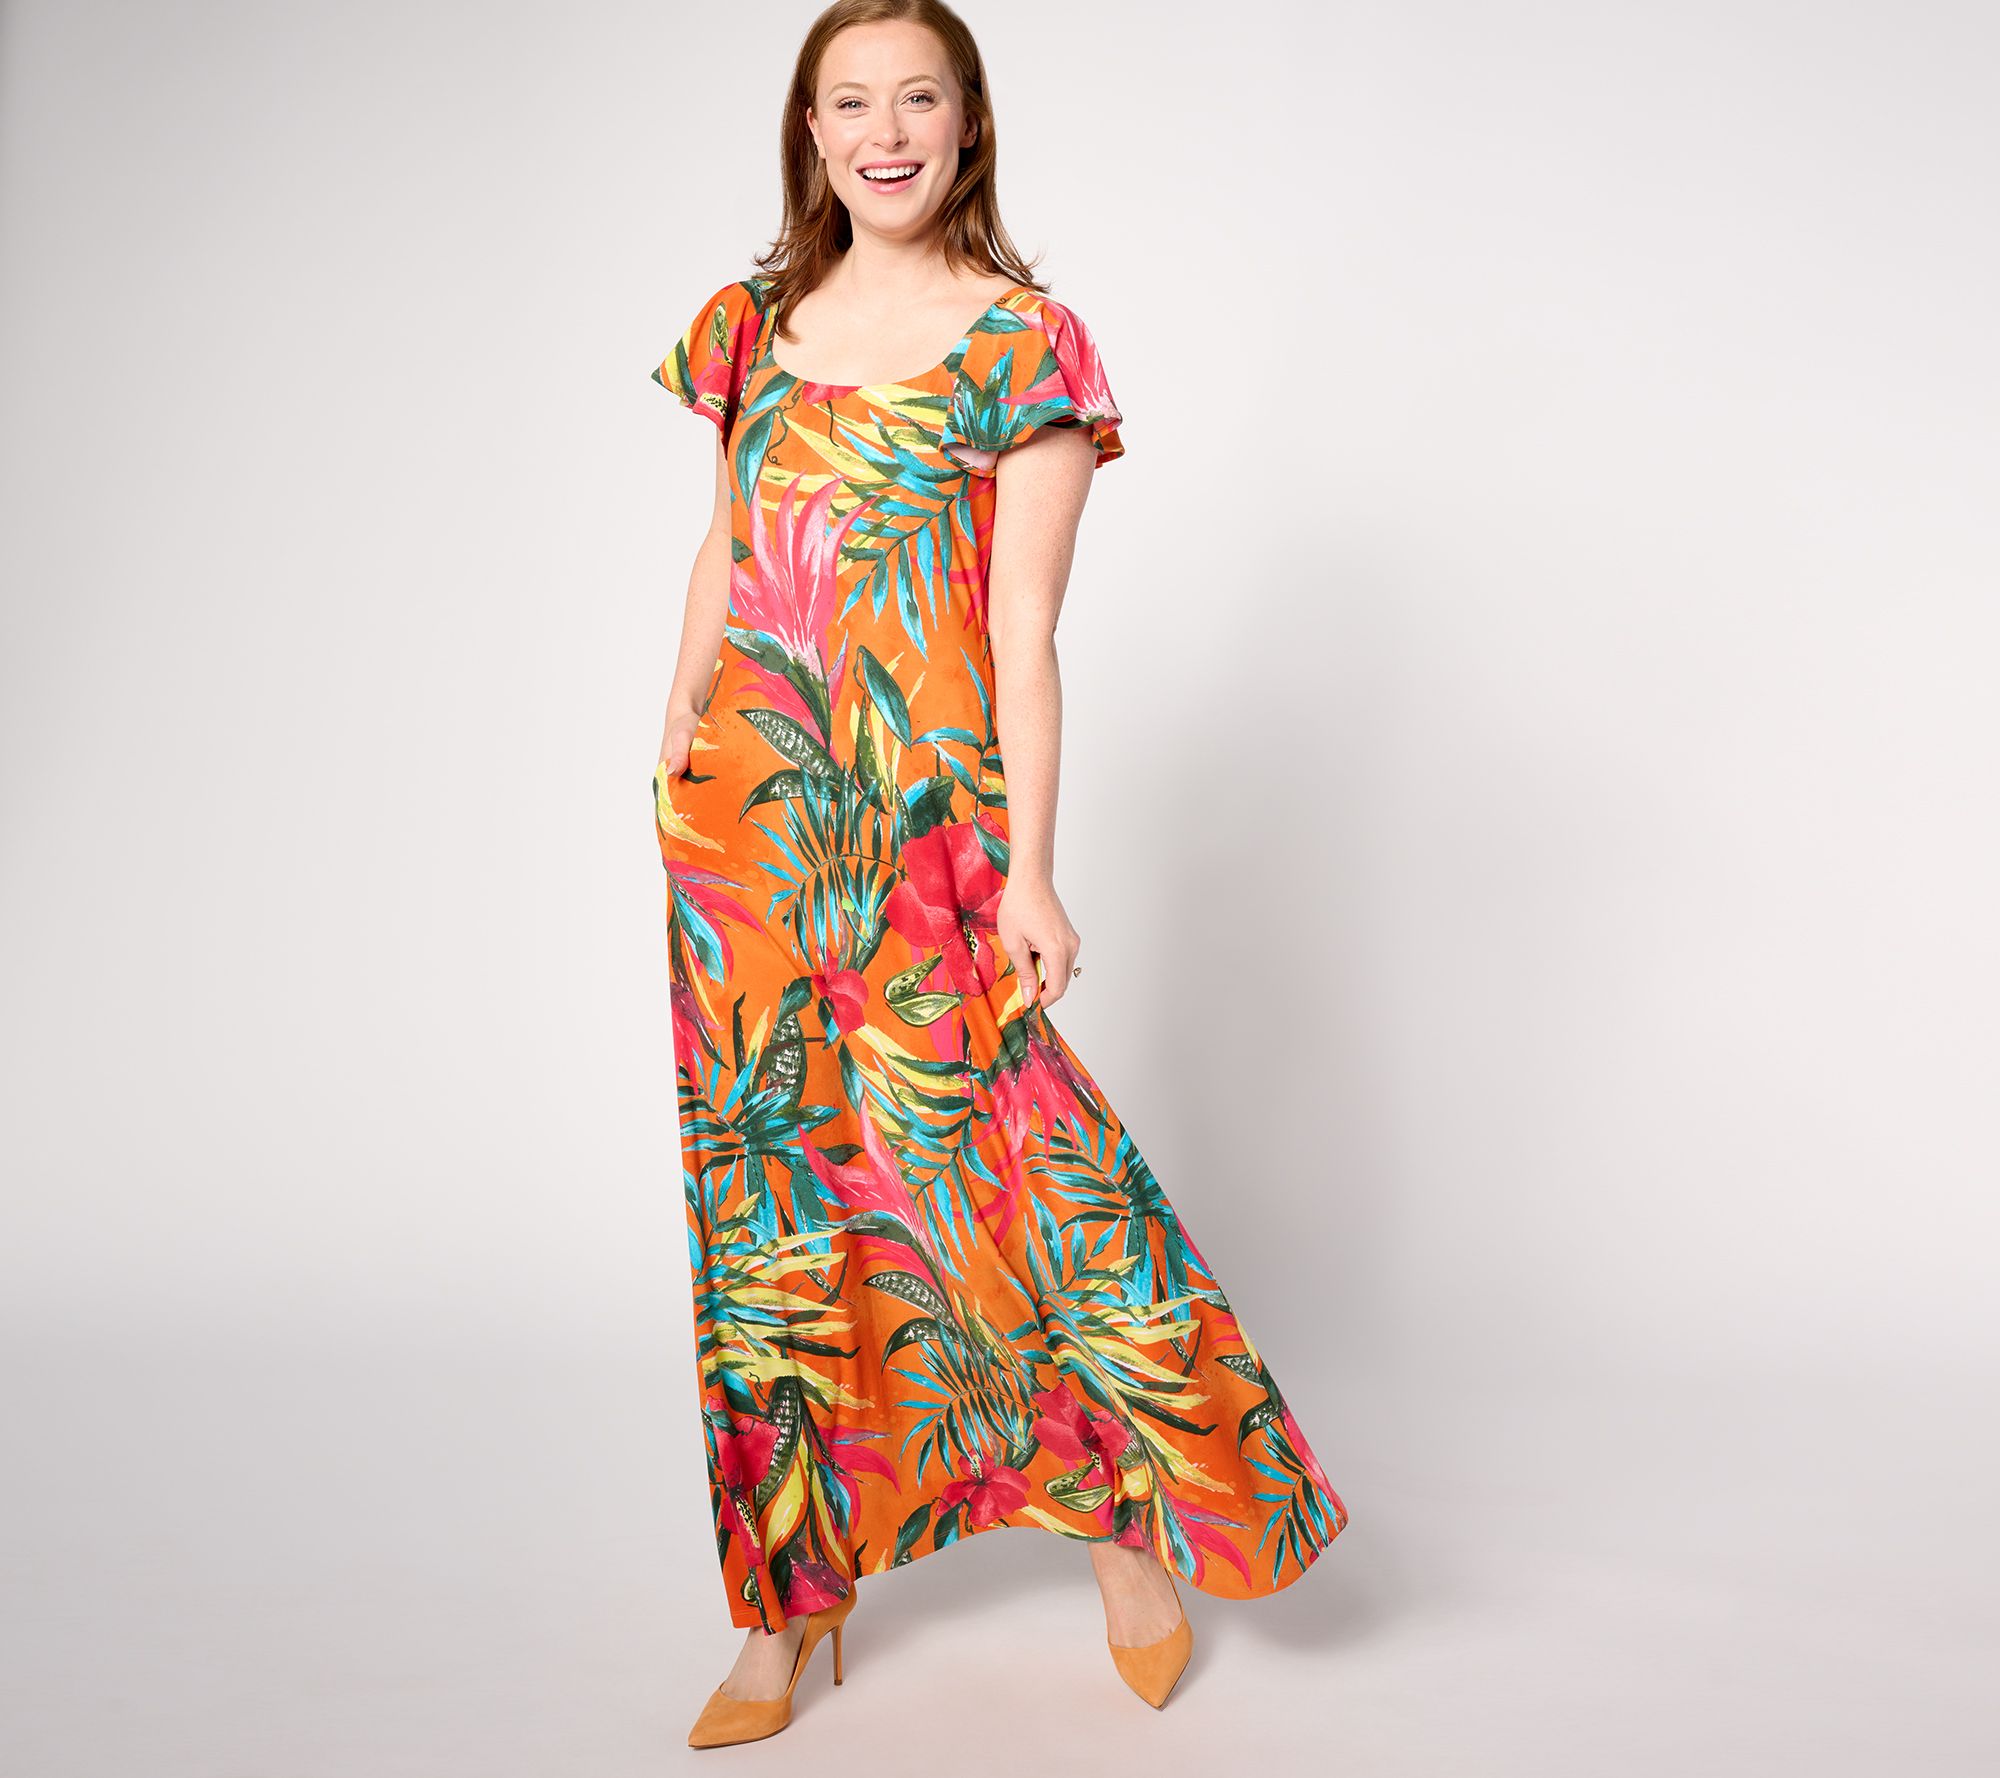  Women's Casual Dresses - 2X / Women's Casual Dresses / Women's  Dresses: Clothing, Shoes & Jewelry